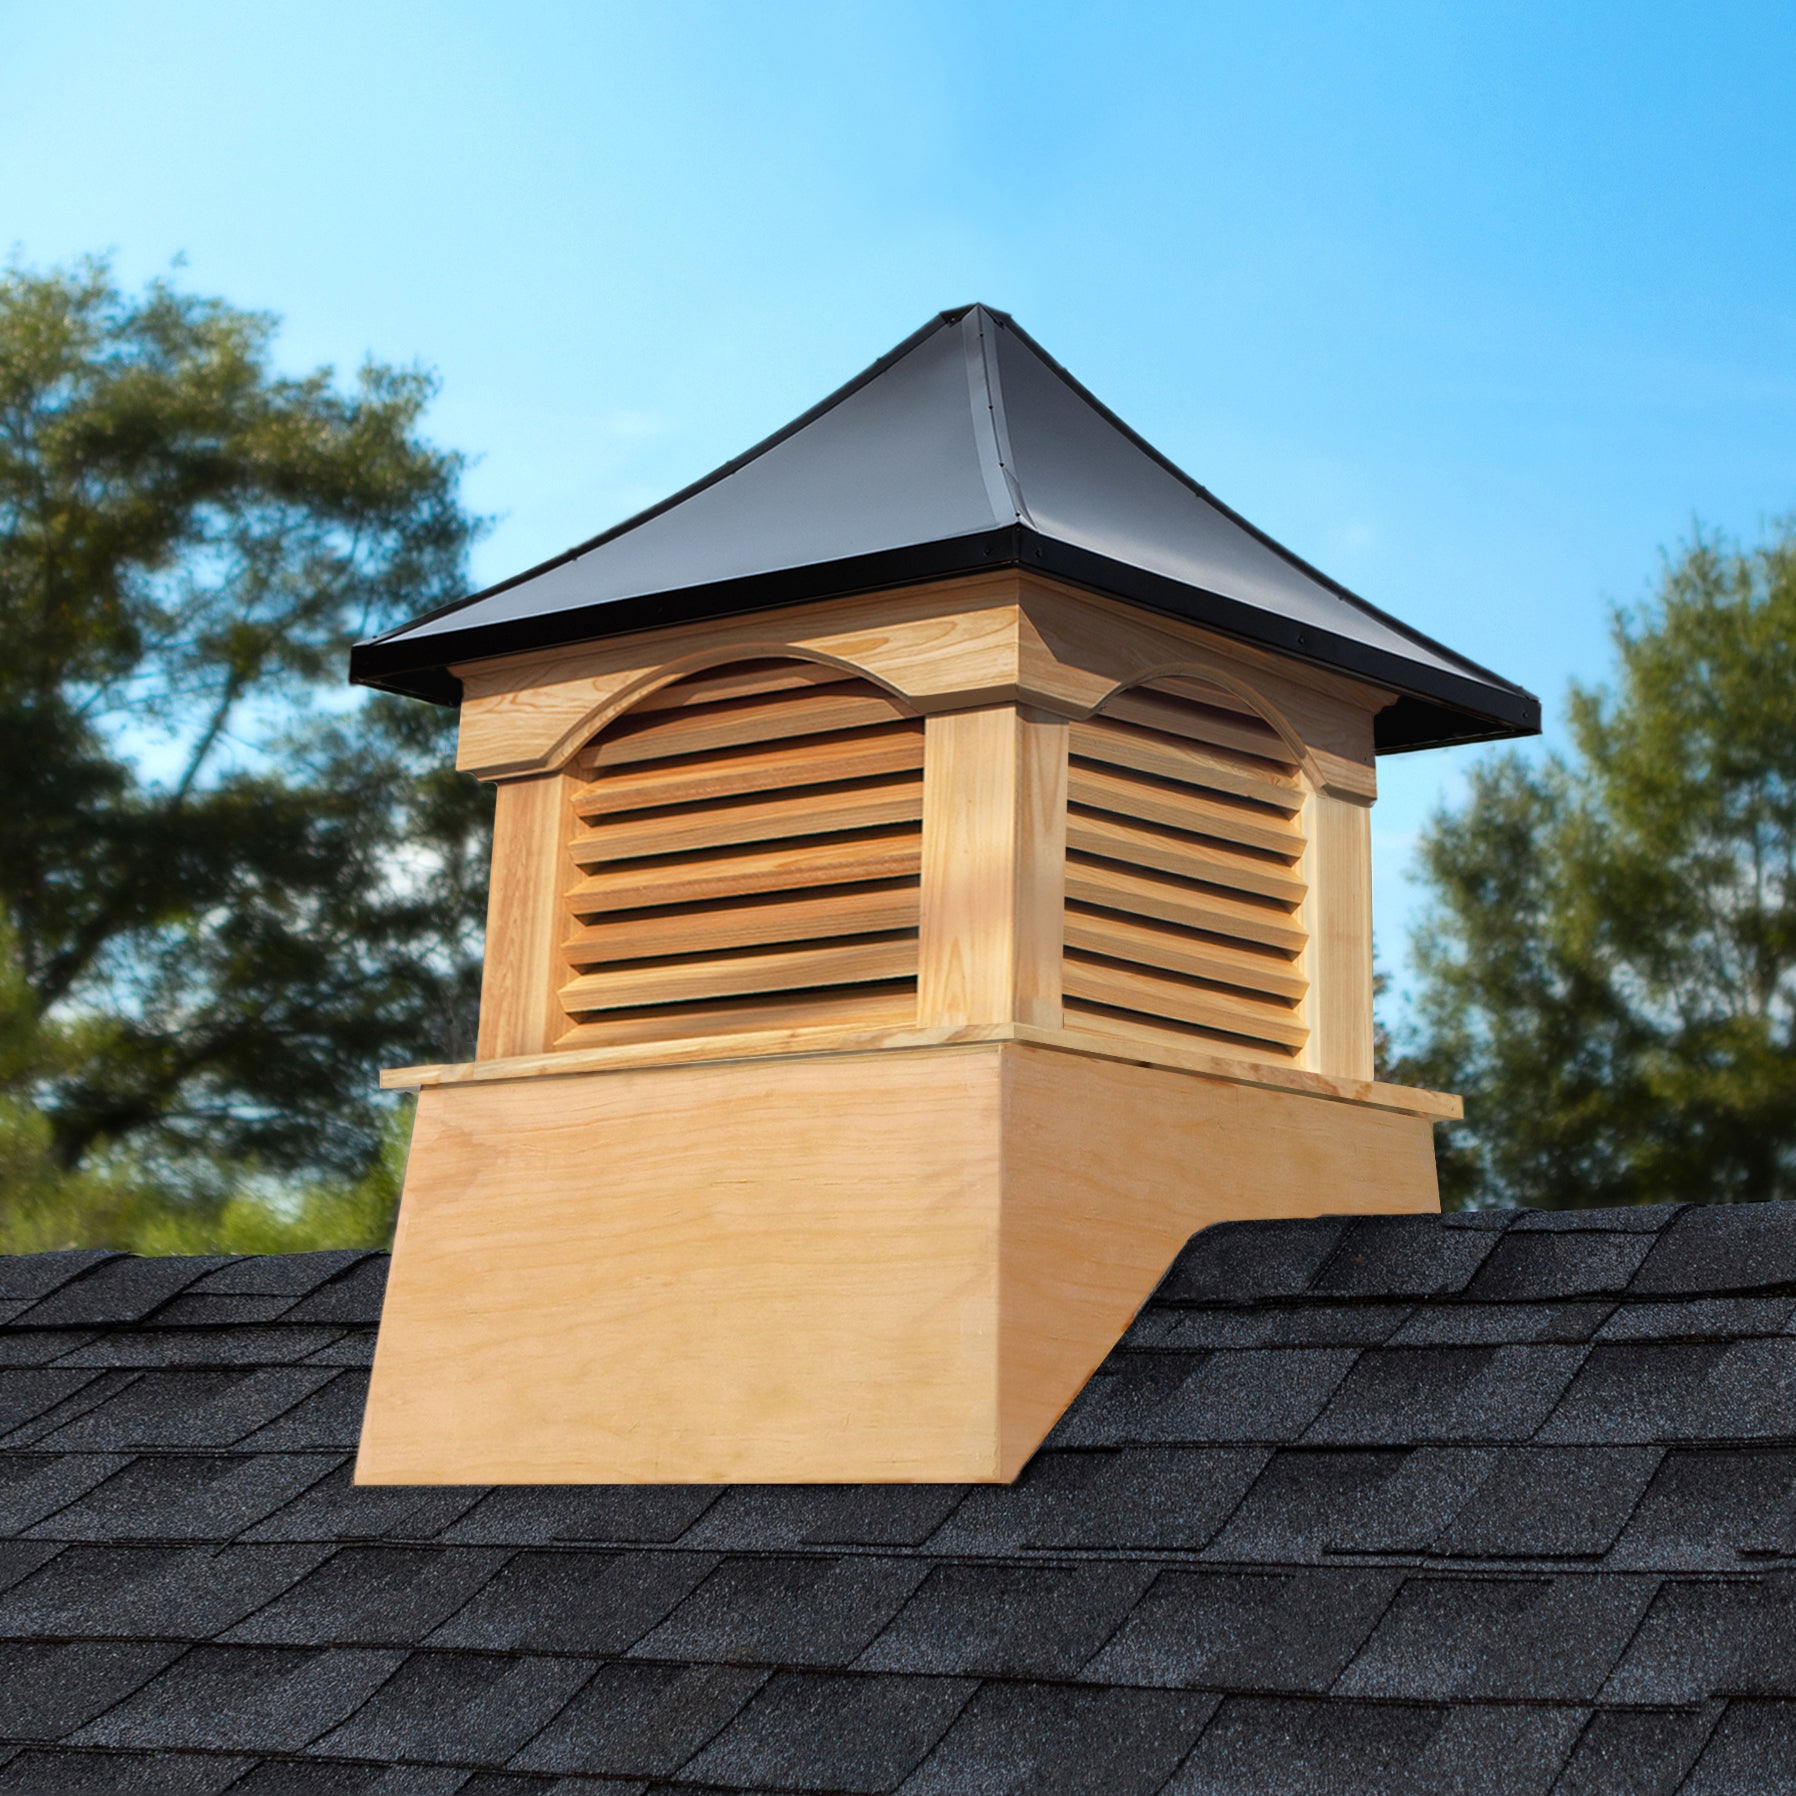 Manchester Wood Cupola with Black Aluminum Roof - Good Directions